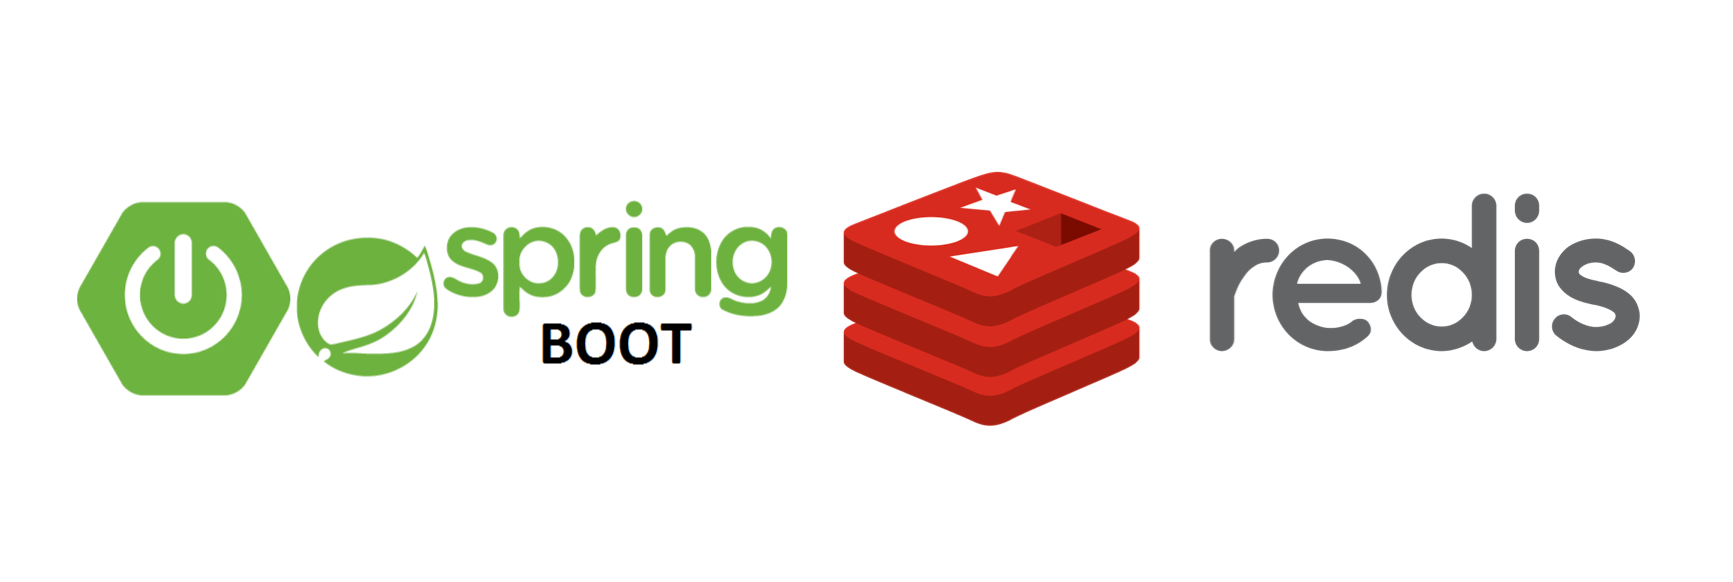 Quick-start spring rest-api with redis 